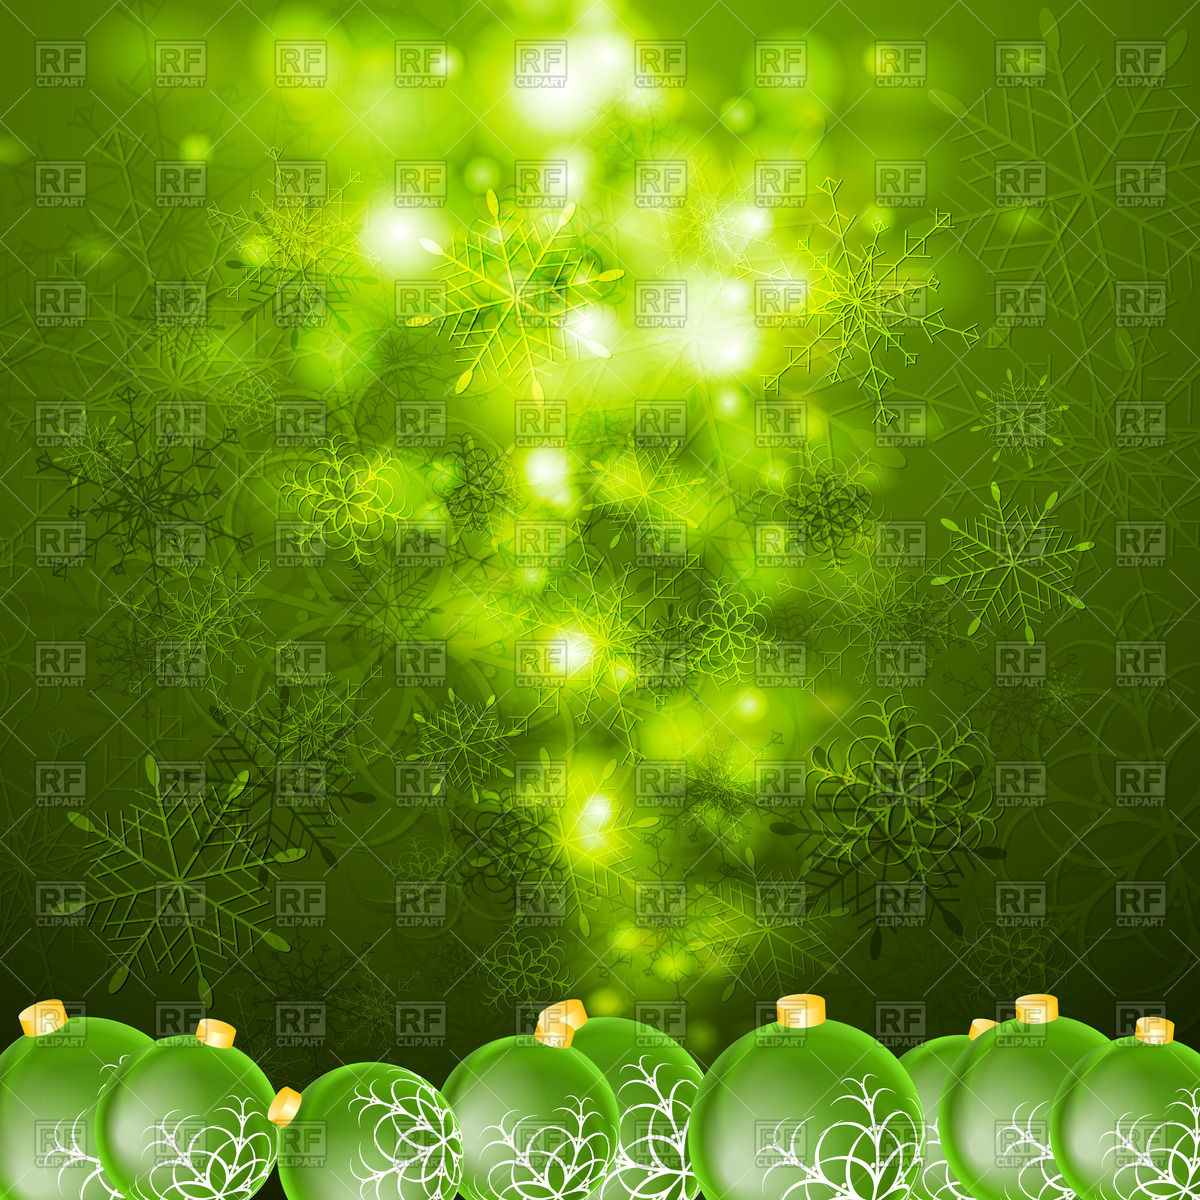 Vibrant glowing green Christmas background with balls and